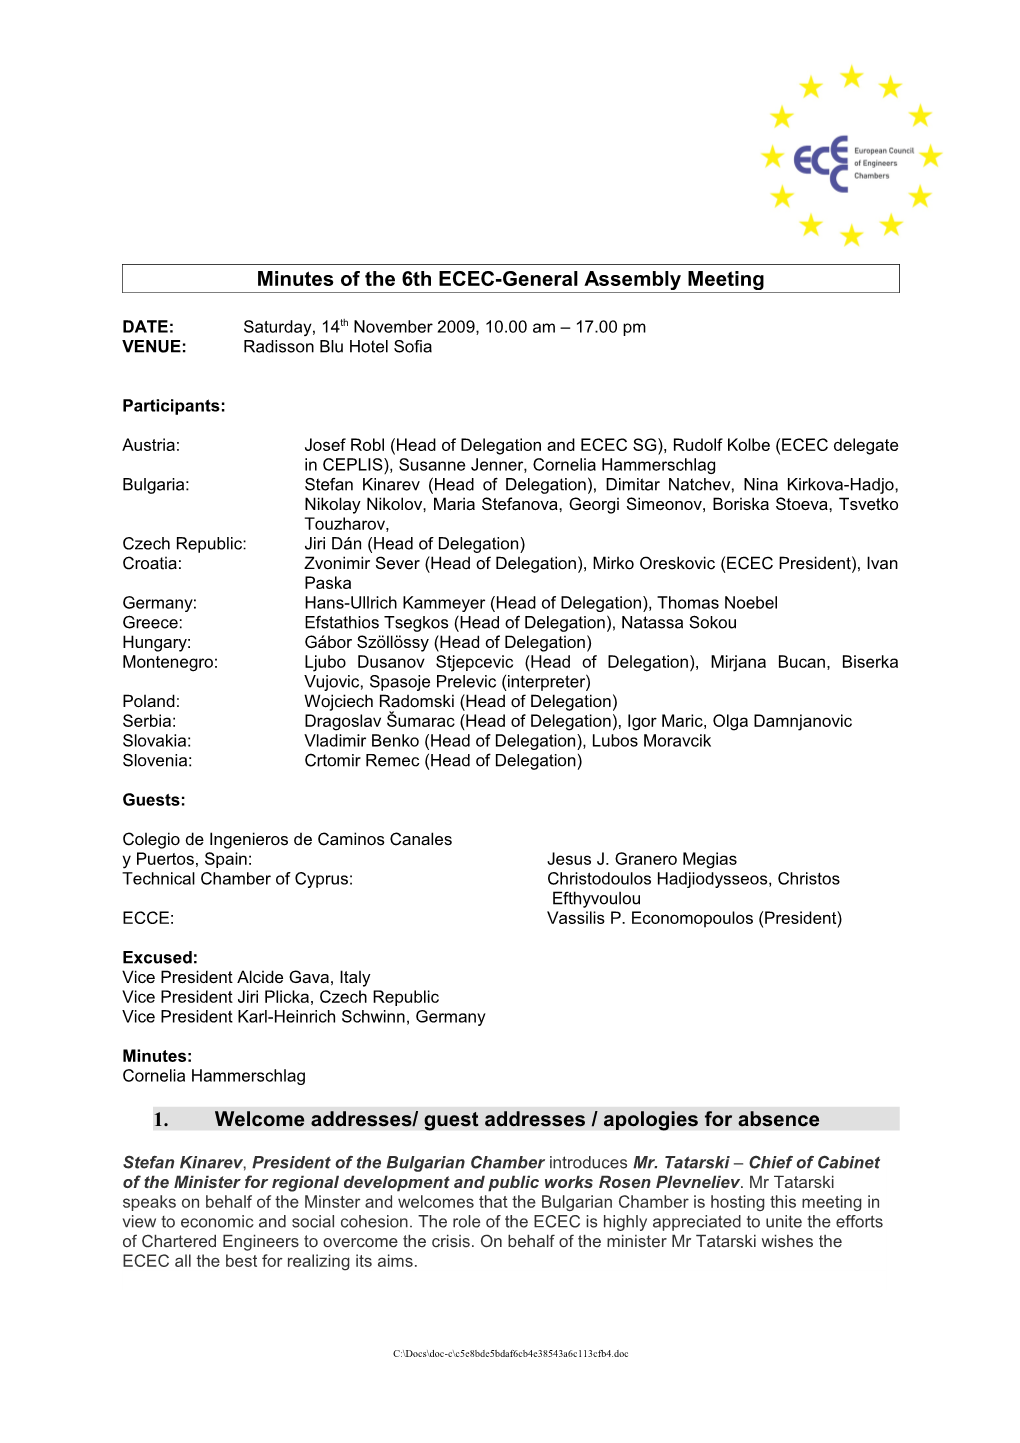 Minutes of the 6Th ECEC-General Assembly Meeting